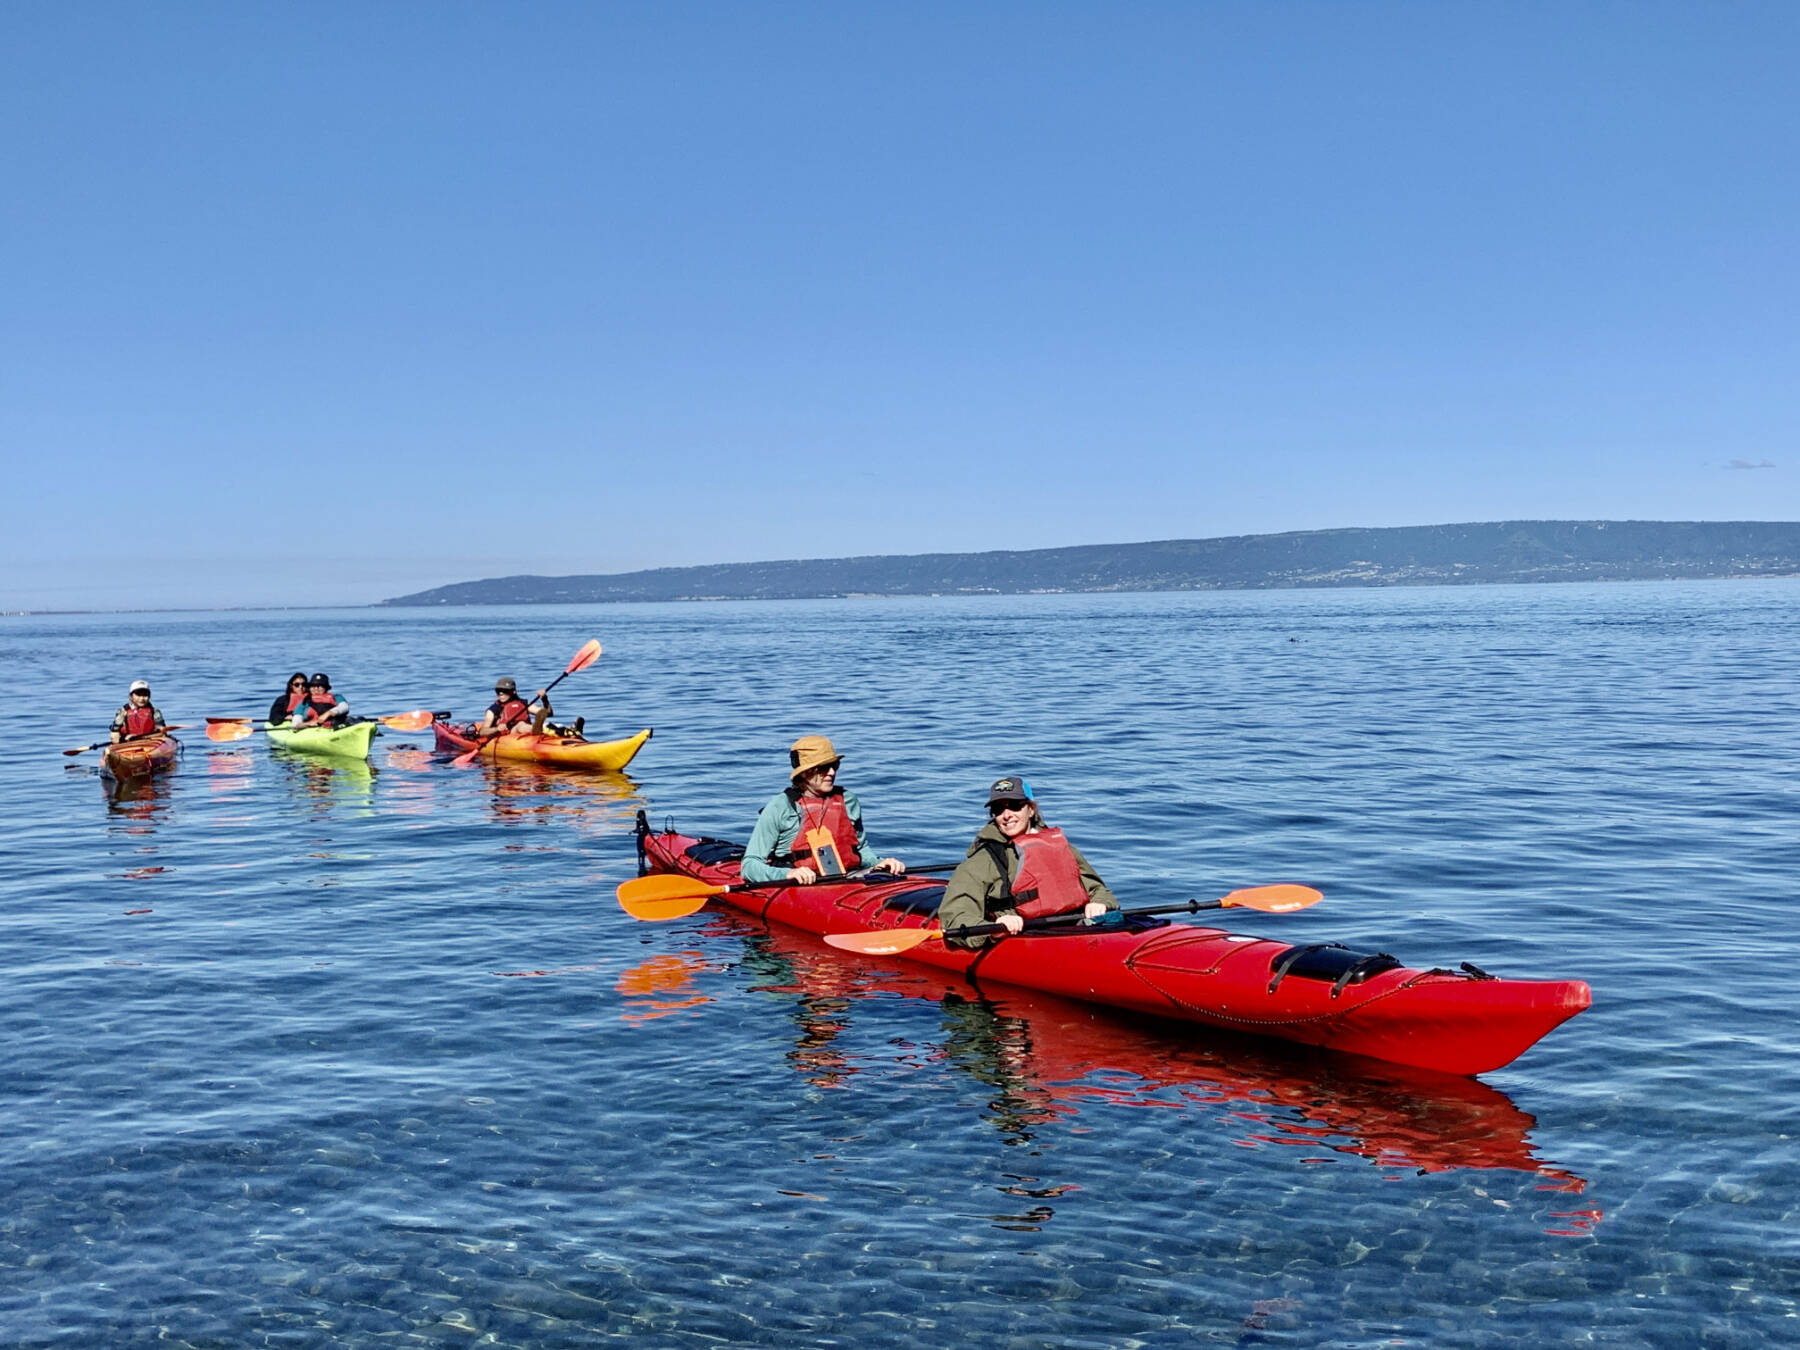 Kayakers enjoy a sunny day as they explore the entrance to Halibut Cove on Tuesday, Aug. 1, 2023 in the Kachemak Bay in Alaska. Photo by Christina Whiting